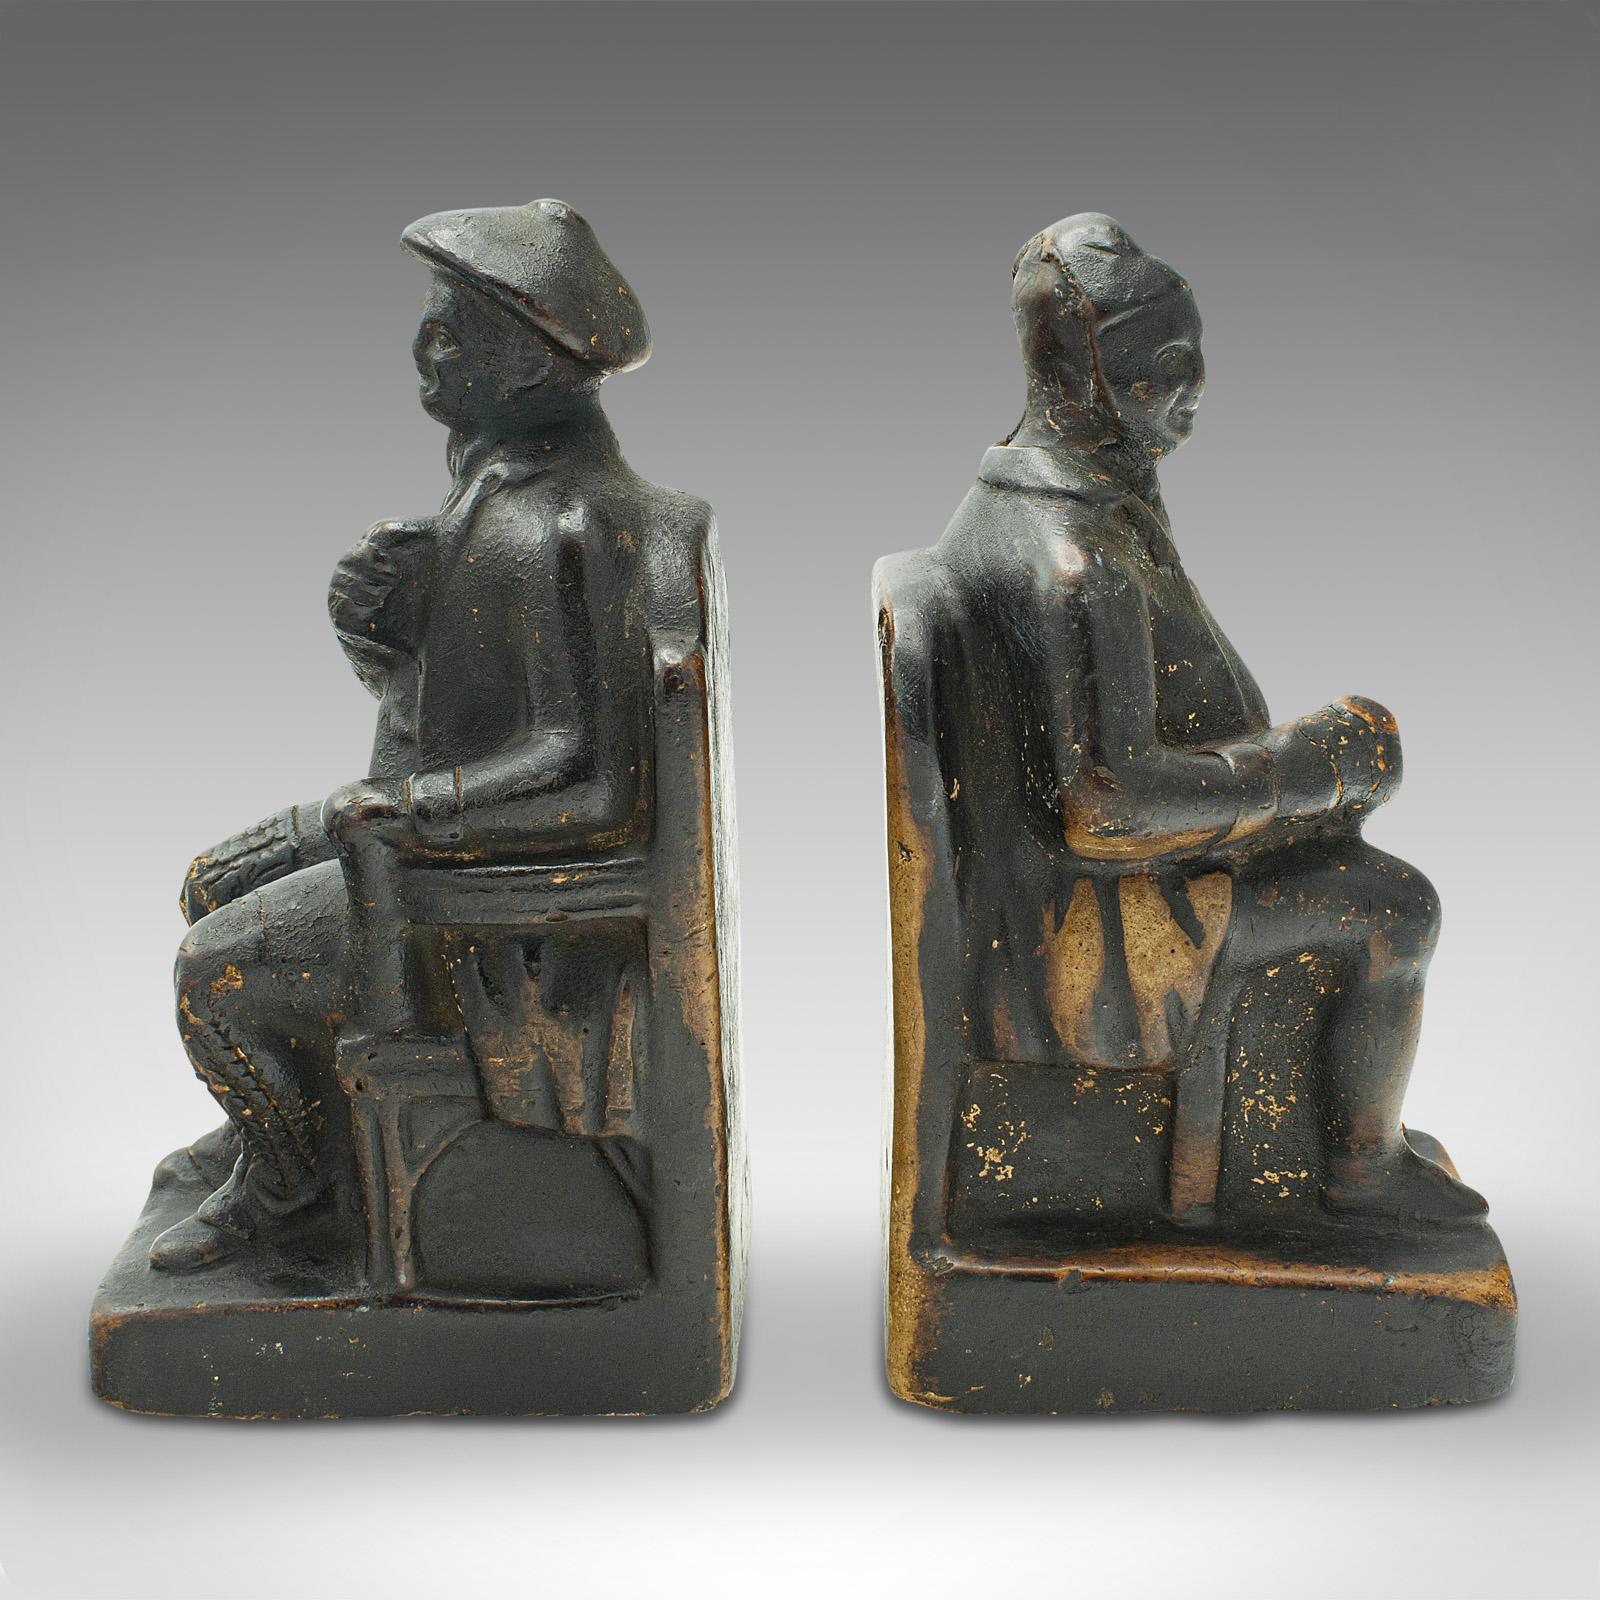 This is a pair of antique figurative bookends. A Dutch, plaster seated man and woman book rest, dating to the late Victorian period, circa 1900.

Appealing example of Dutch craftsmanship, with jovial character
Displaying a desirable aged patina